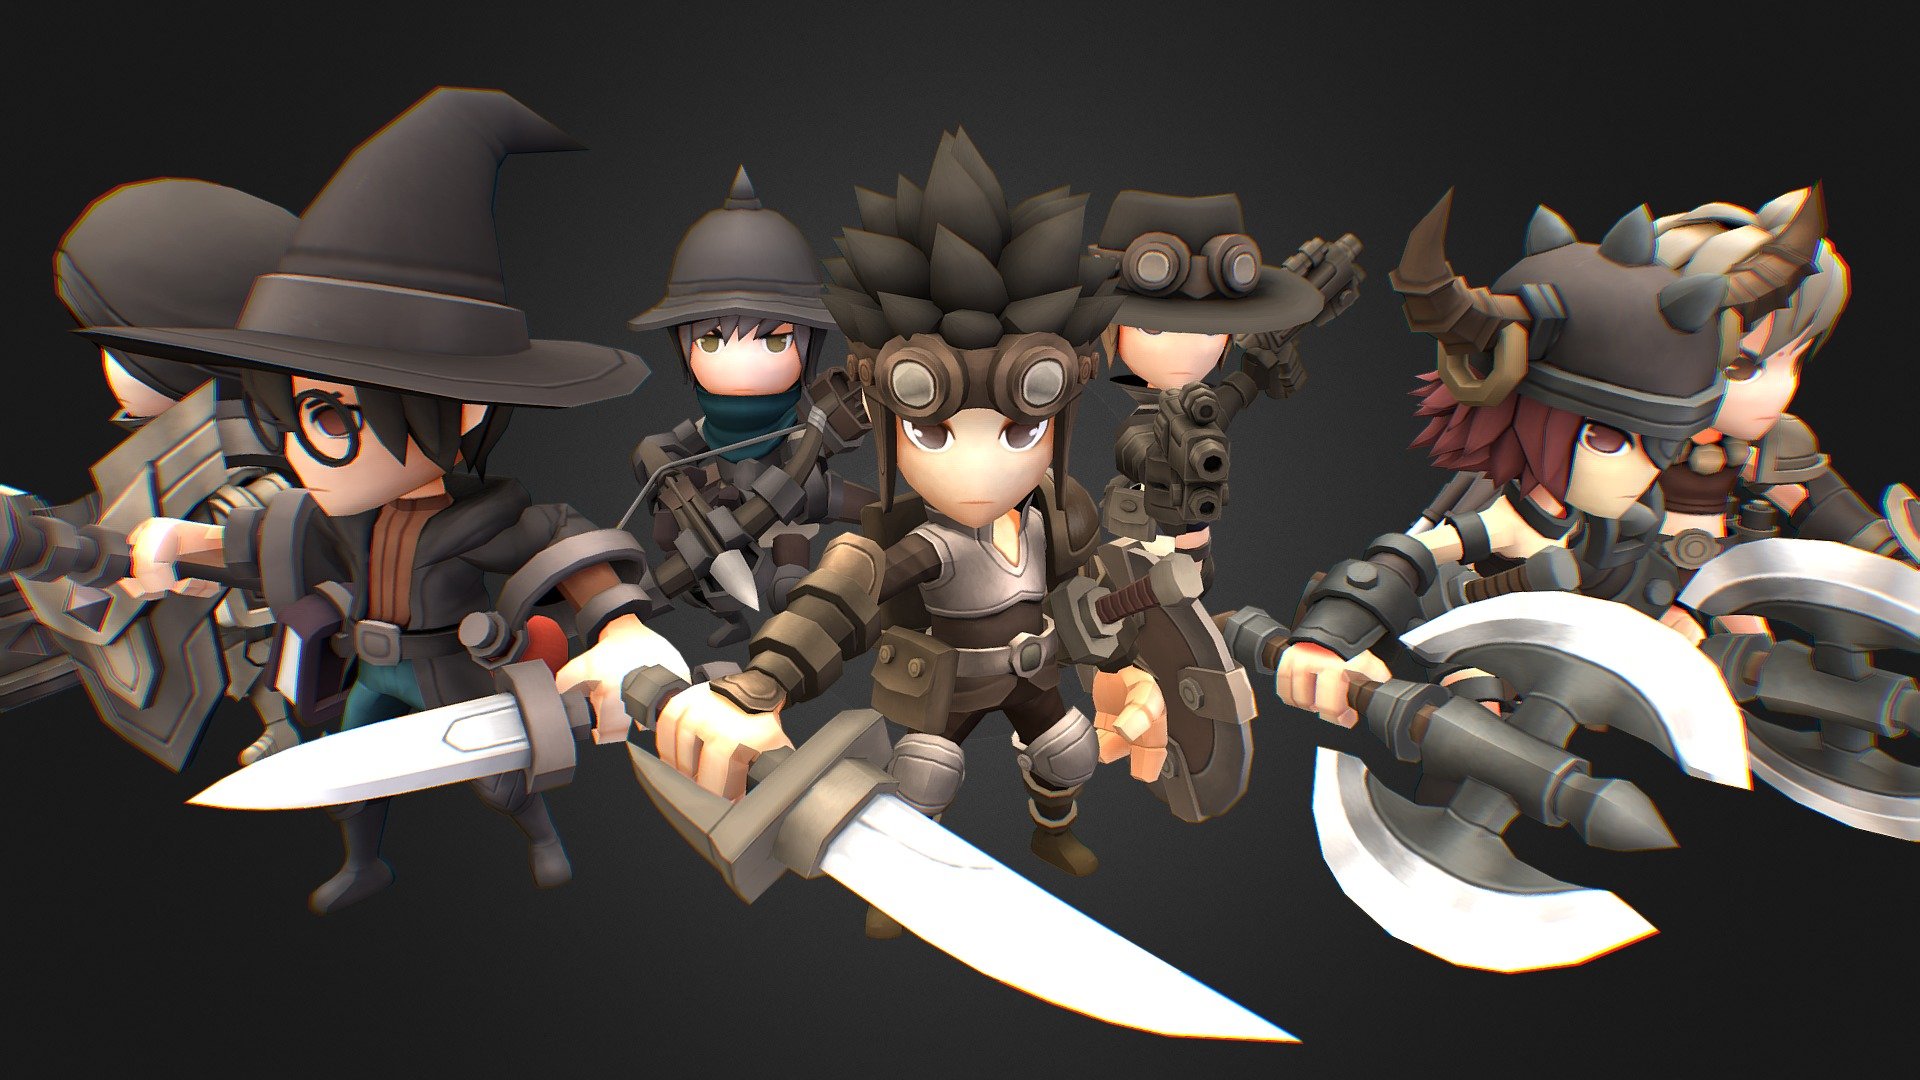 Supported Unity versions 2018.4.8 or higher

Ranger / Barbarian / Wizard / Crossbowman / Paladin / Gunner / Monk

Each character own 3 colors textures ( 2048x2048 PNG )

Animation preview

Each character own 11 basic animations

Idle / Walk / Run / Attack x2 / Damage x2 / Jump / Stunned / Die / GetUp - Hero Series - Expeditions - 3D model by Downrain DC (@downraindc3d) 3d model